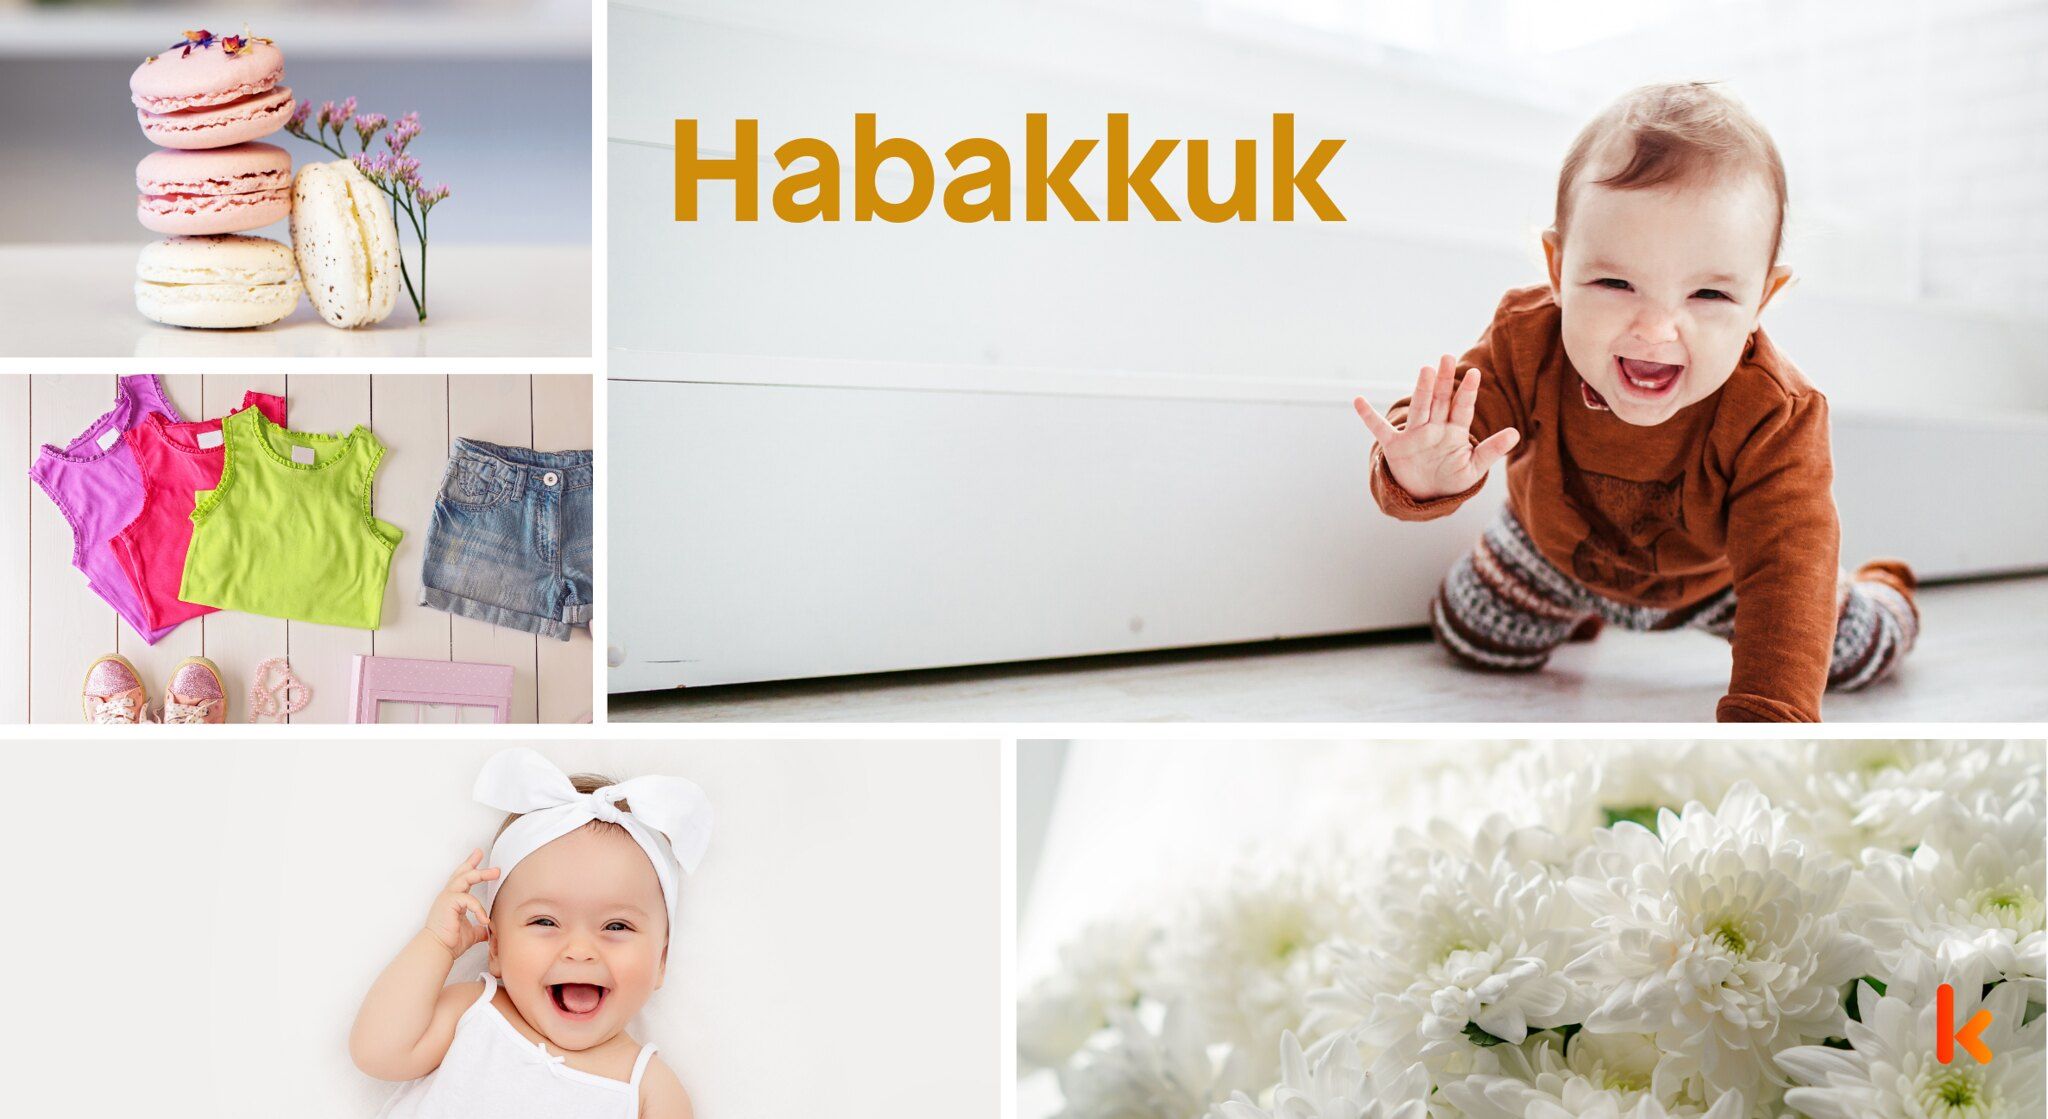 Meaning of the name Habakkuk